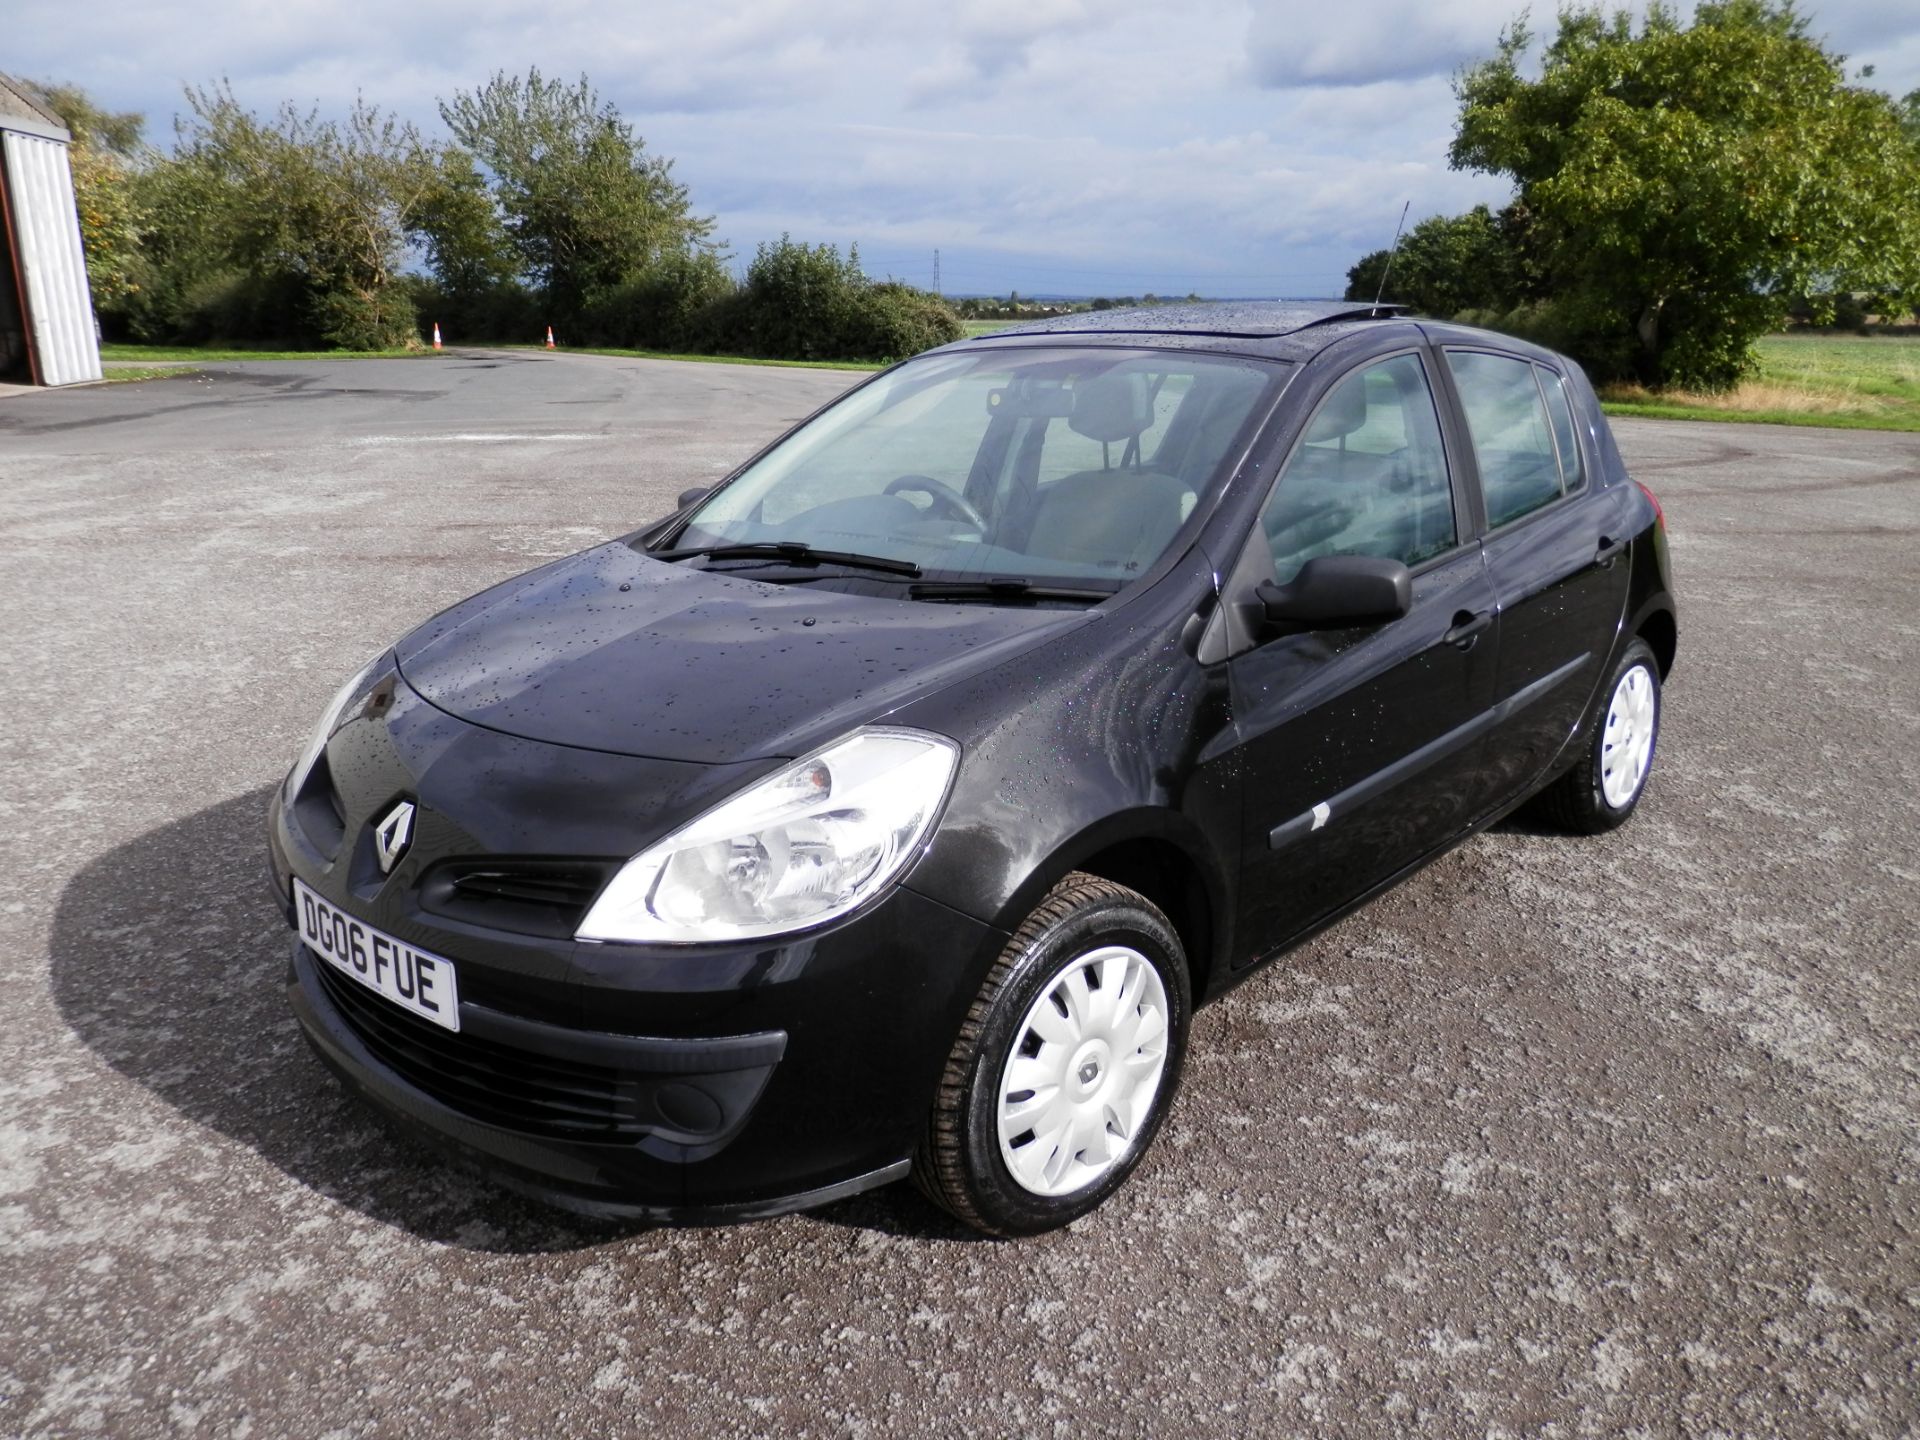 06/2006 RENAULT CLIO (FACELIFT MODEL) 1.4 EXPRESSION 16 VALVE, AIR CON, ONLY 47K MILES WARRANTED.